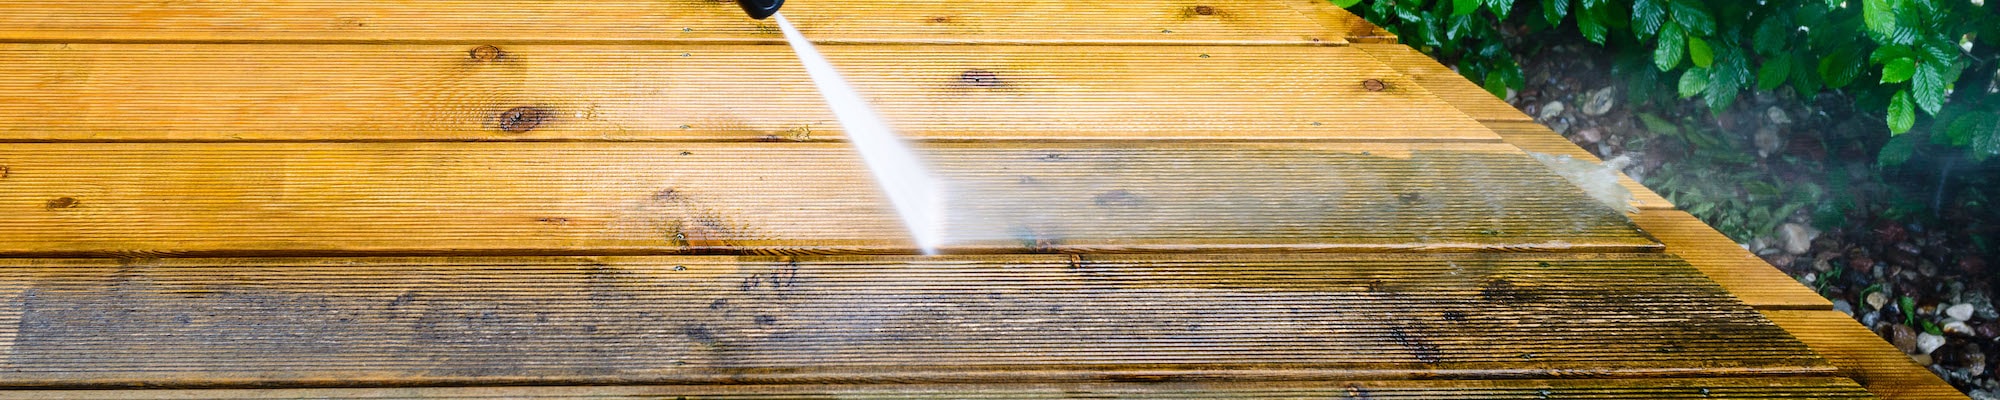 a wooden deck being power washed